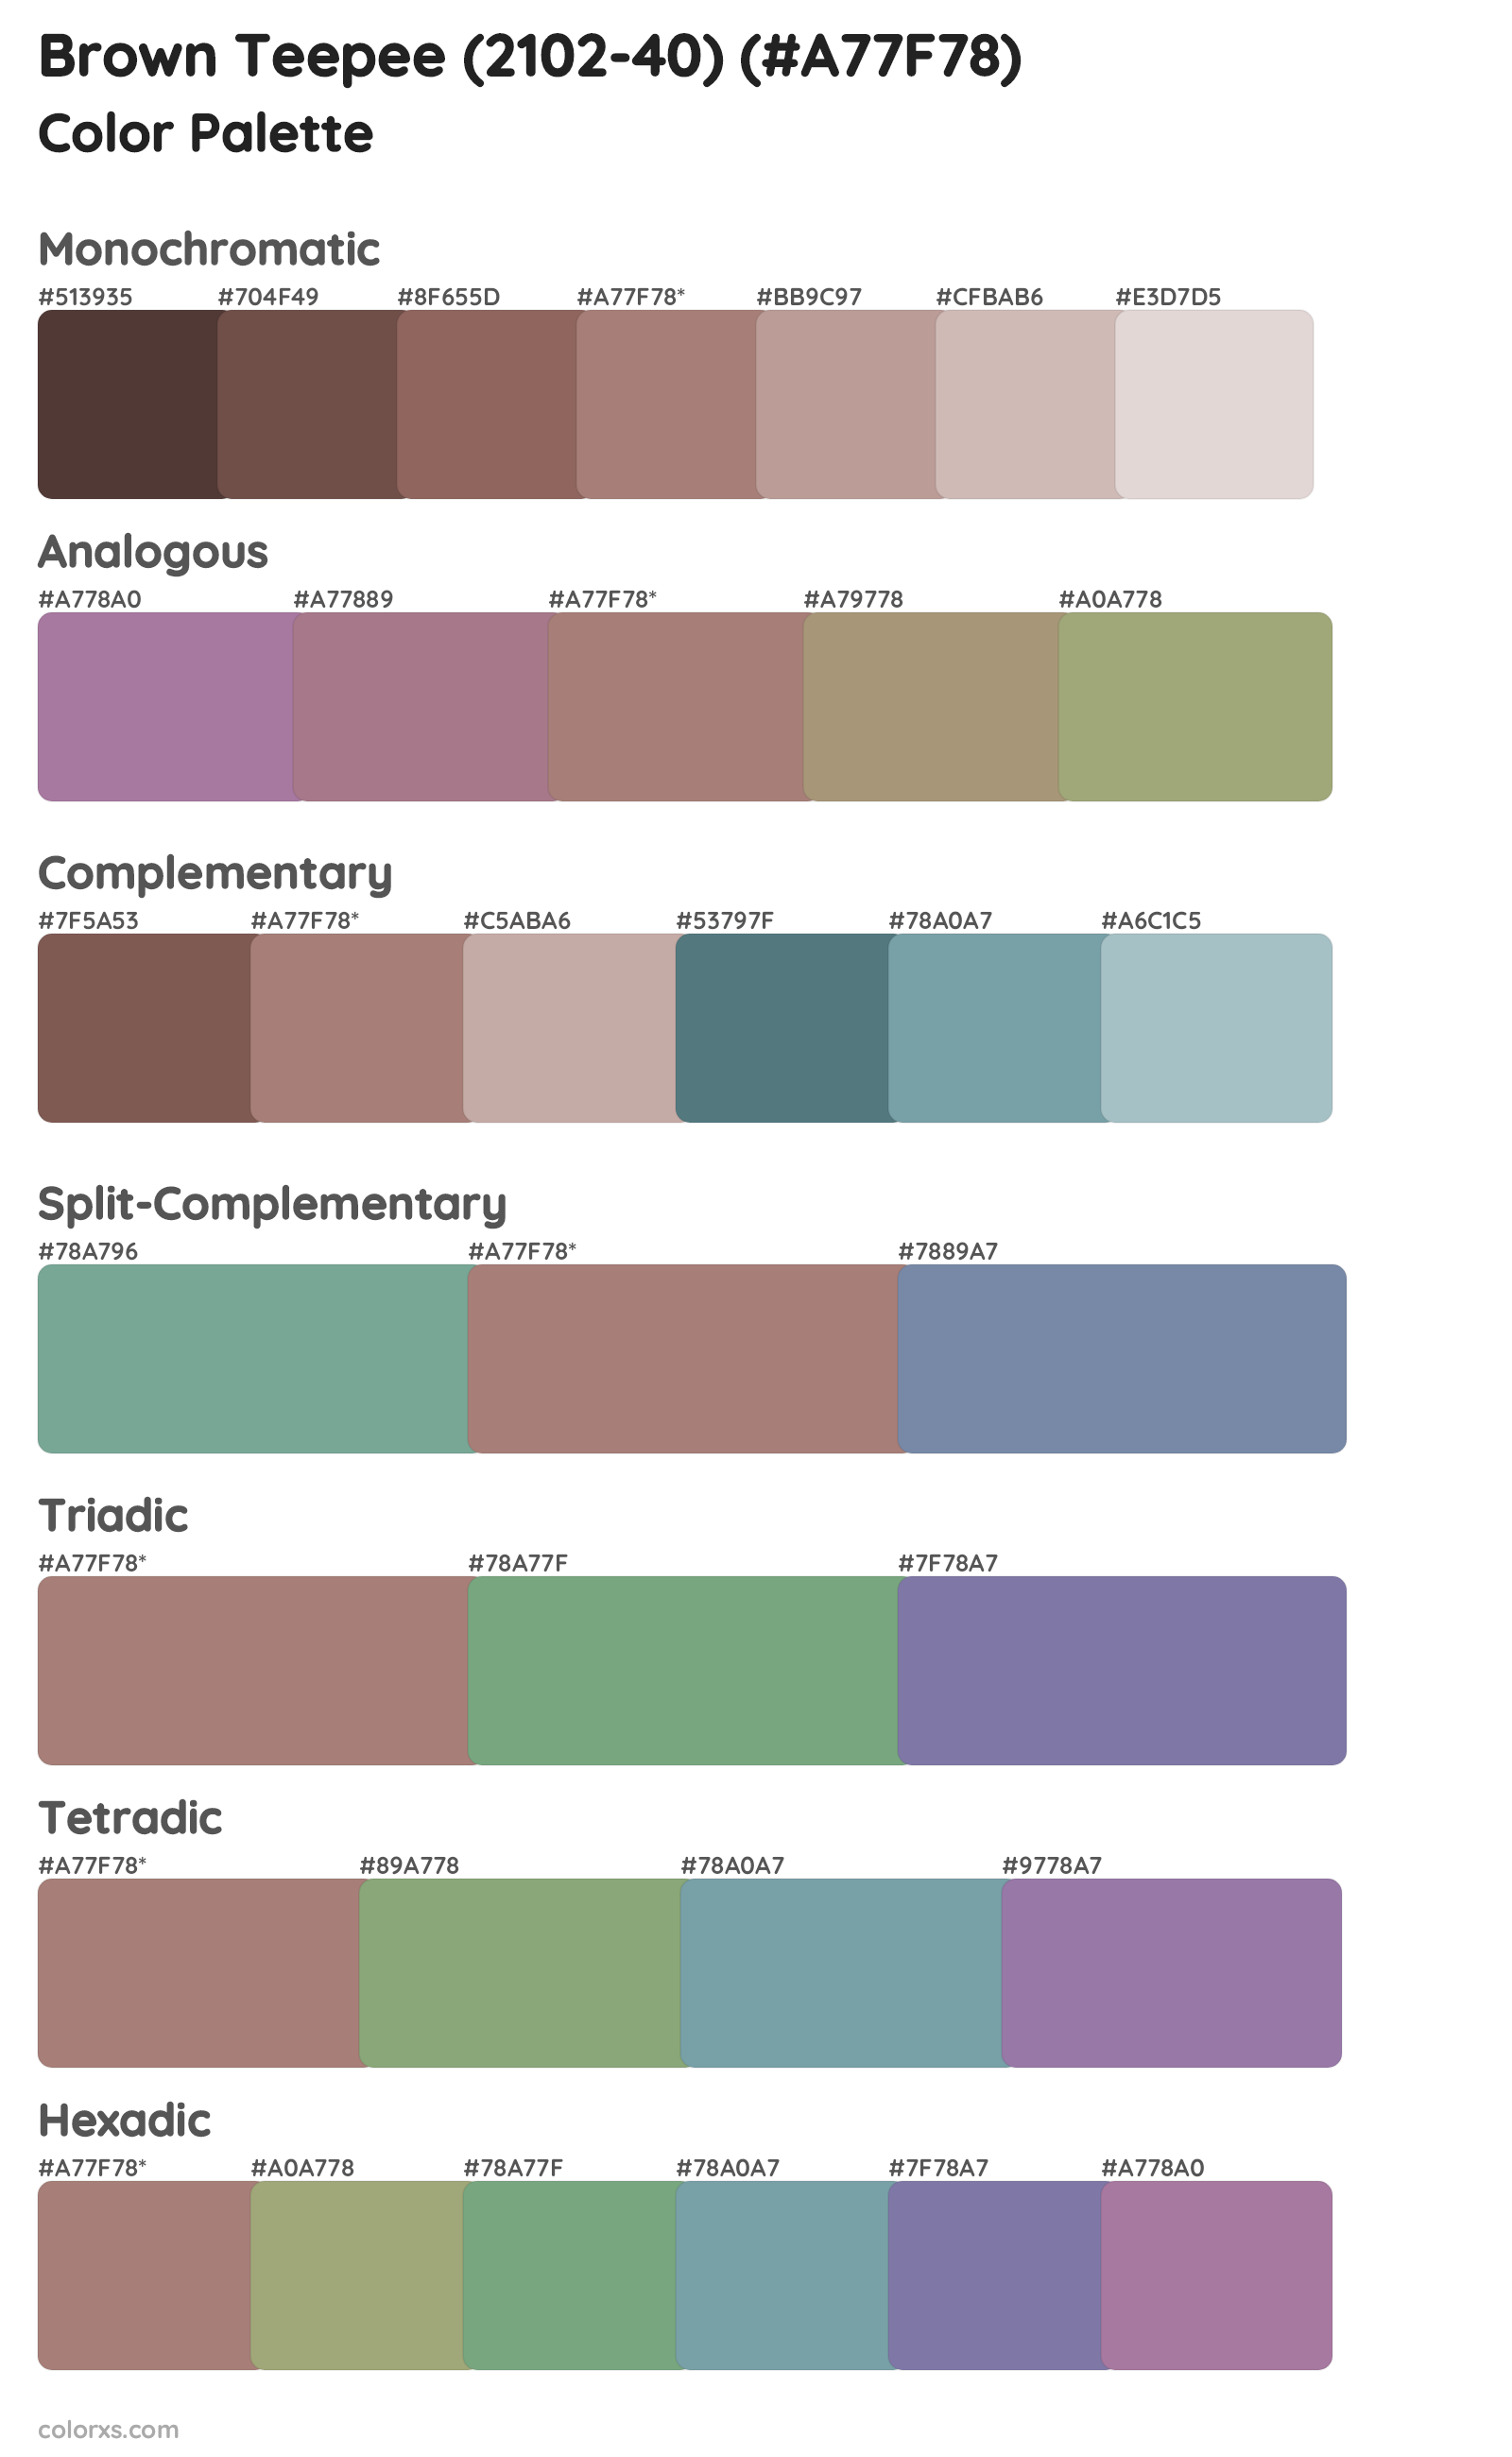 Brown Teepee (2102-40) Color Scheme Palettes